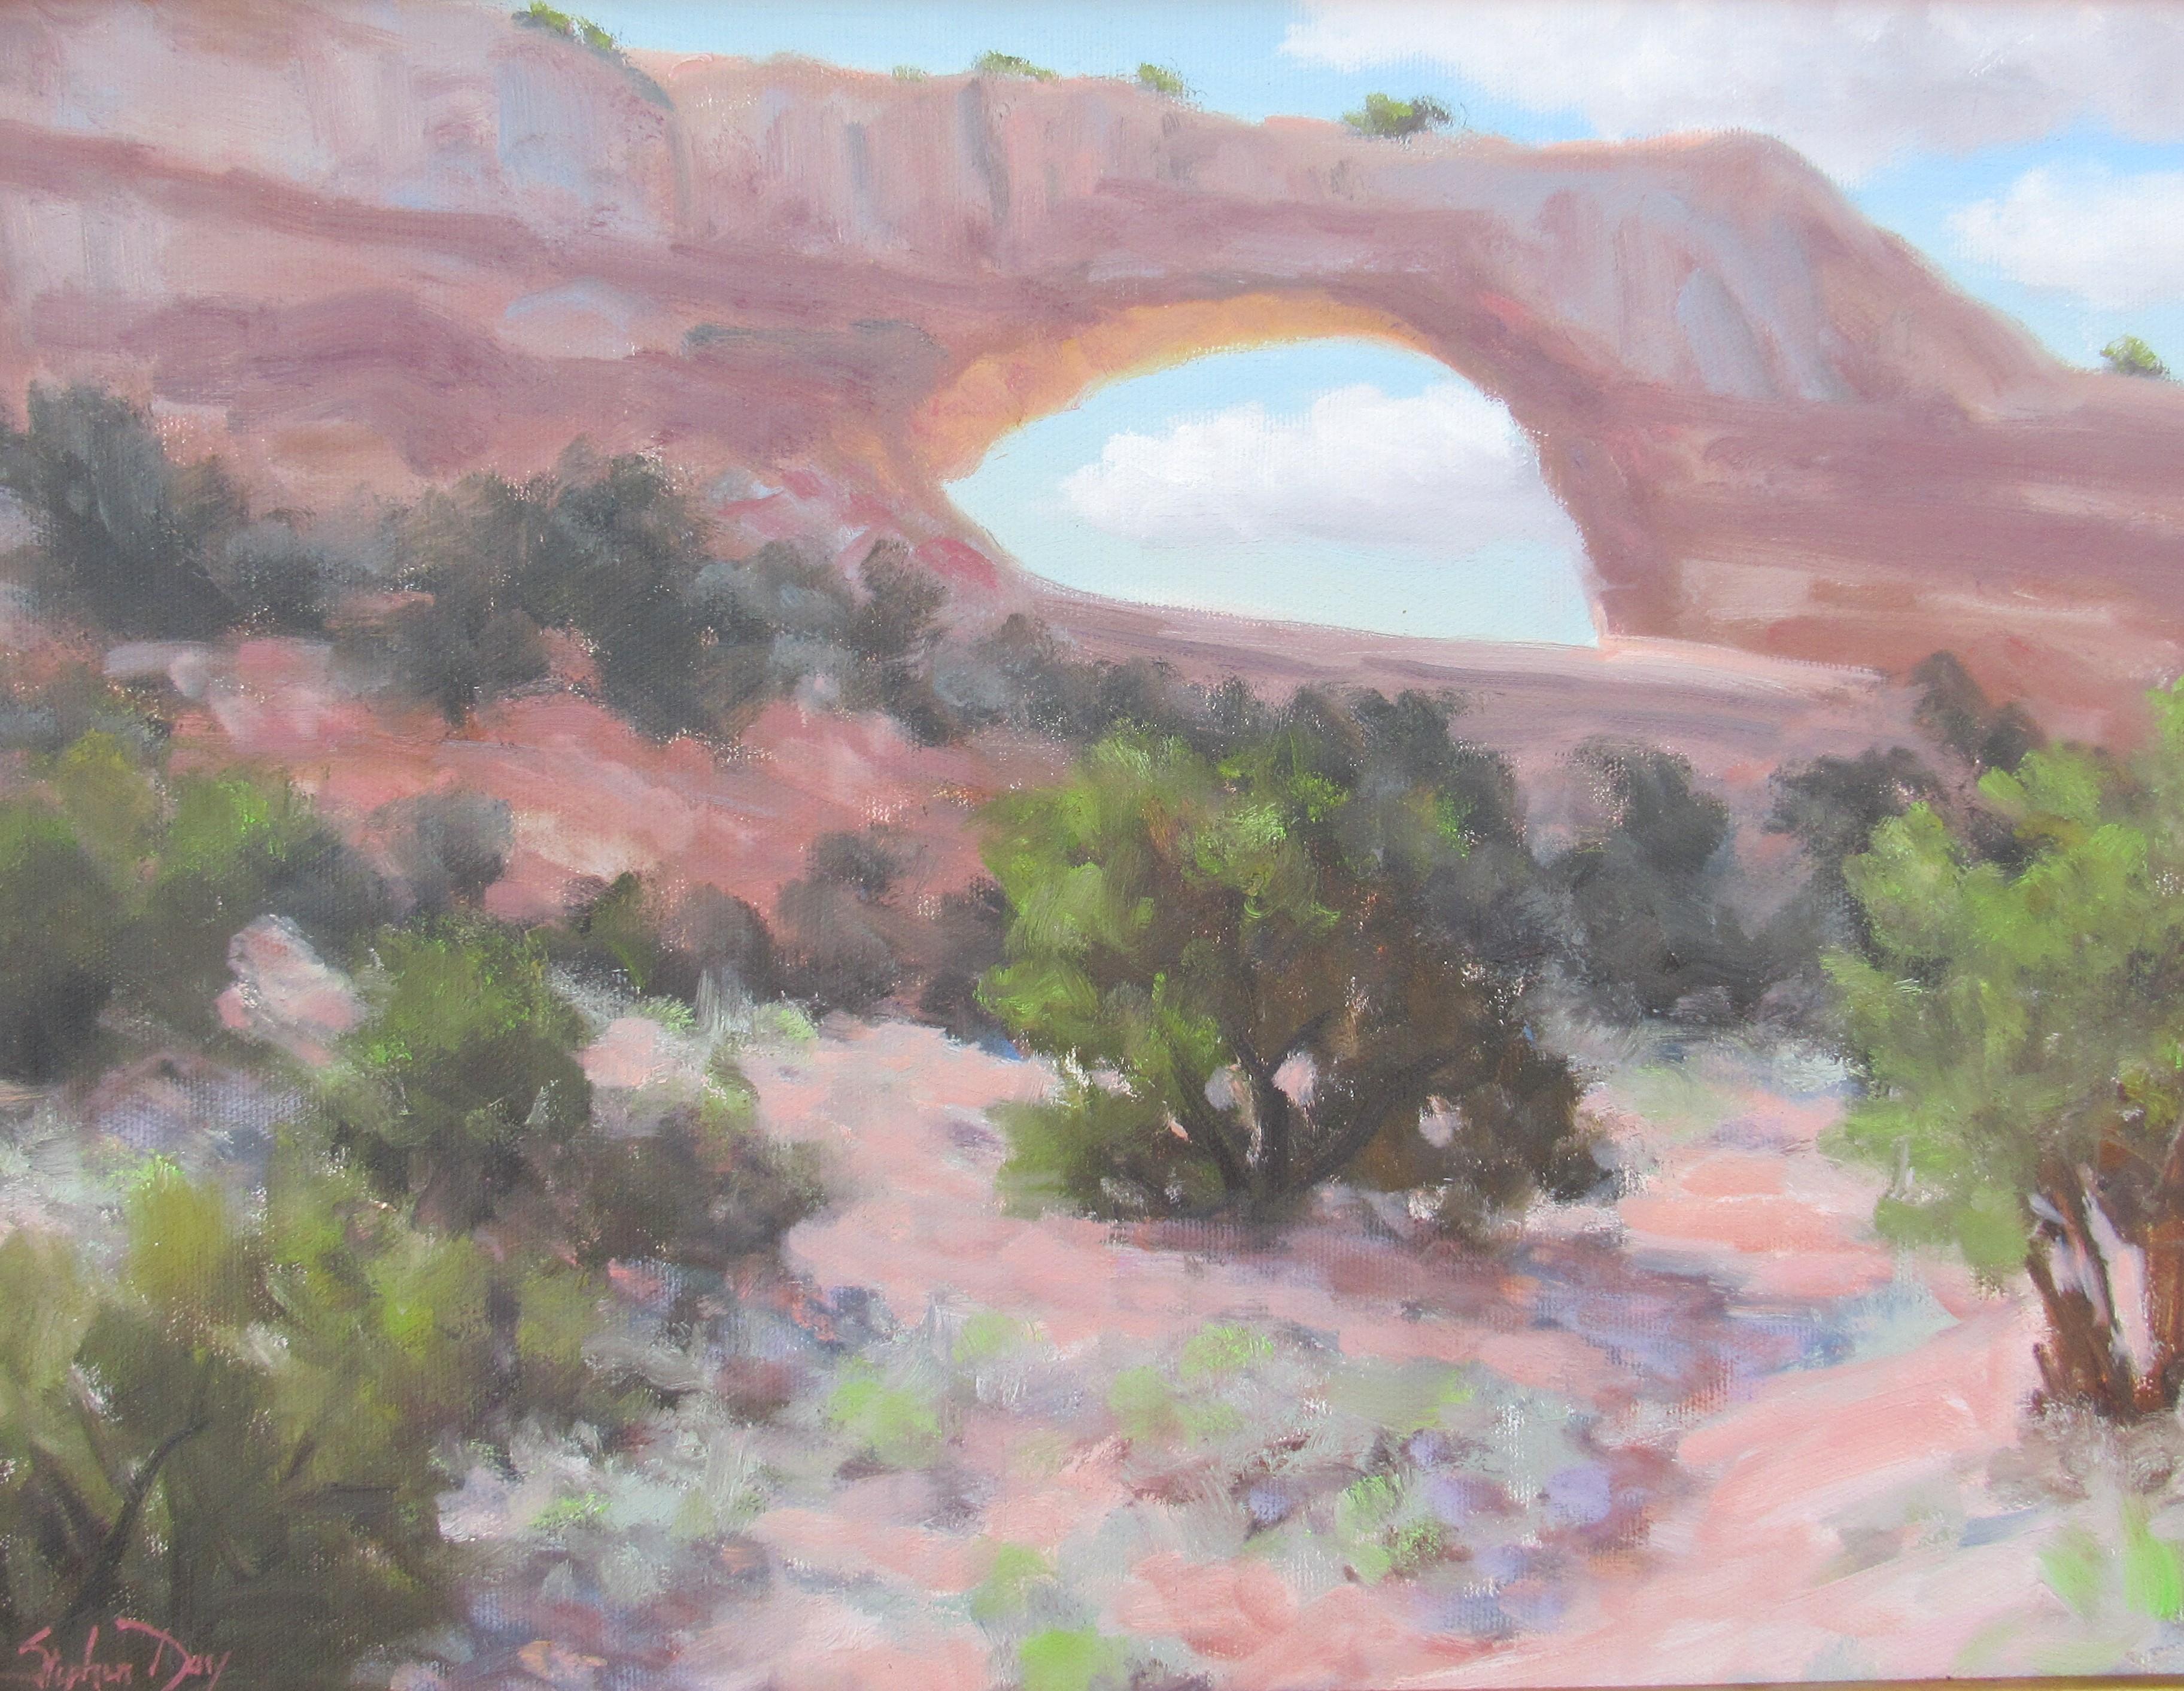 Stephen Day Figurative Painting - "Wilson Arch Near Moab, Utah, " Oil Painting